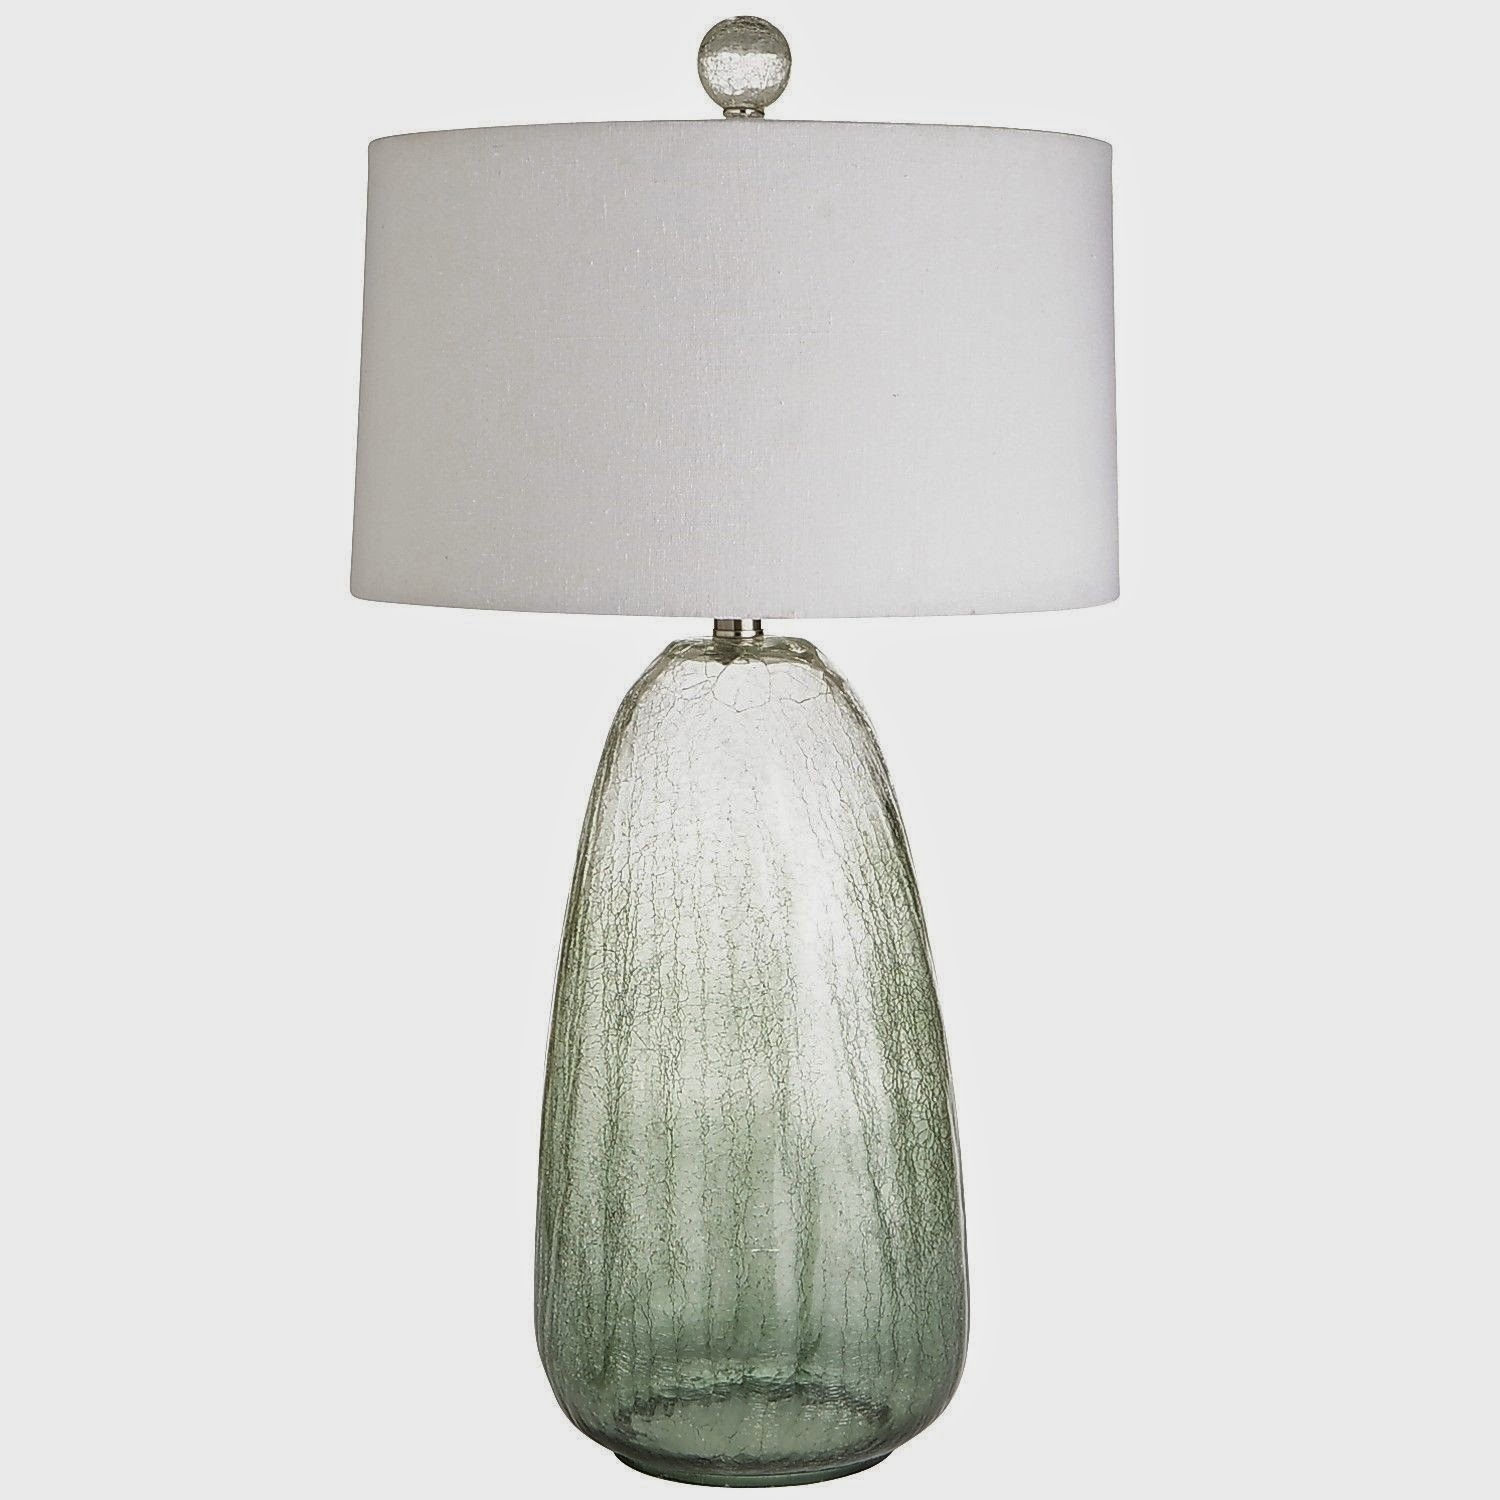 Birch lanes linden glass table lamp is a stunning gourd